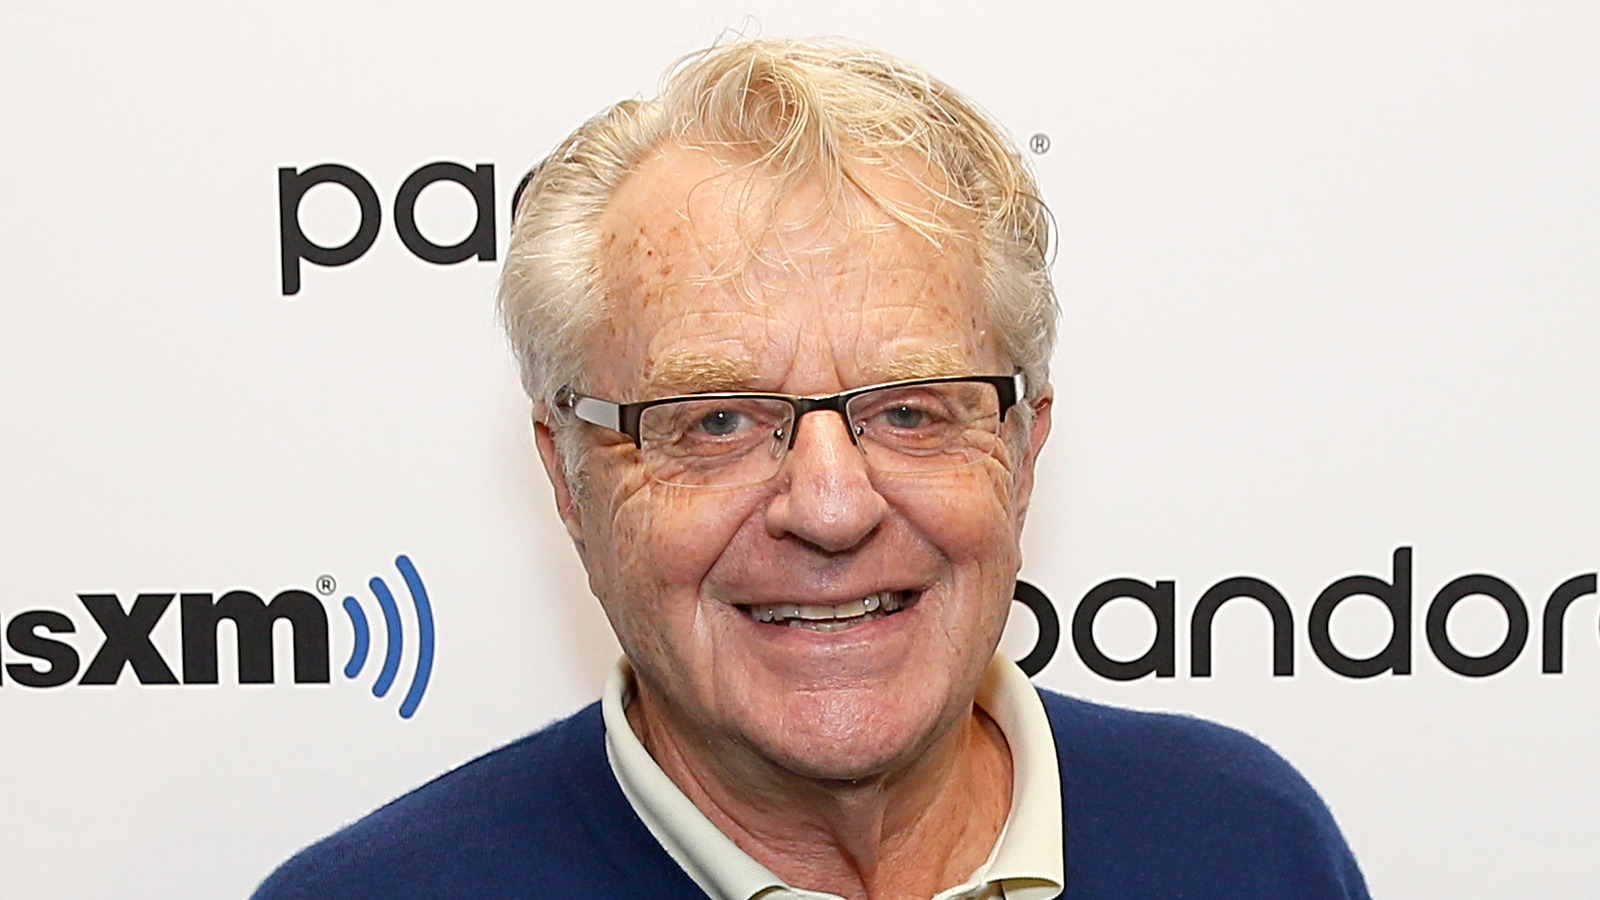 Jerry Springer Had A Turn In Politics Before His Controversial TV Show.